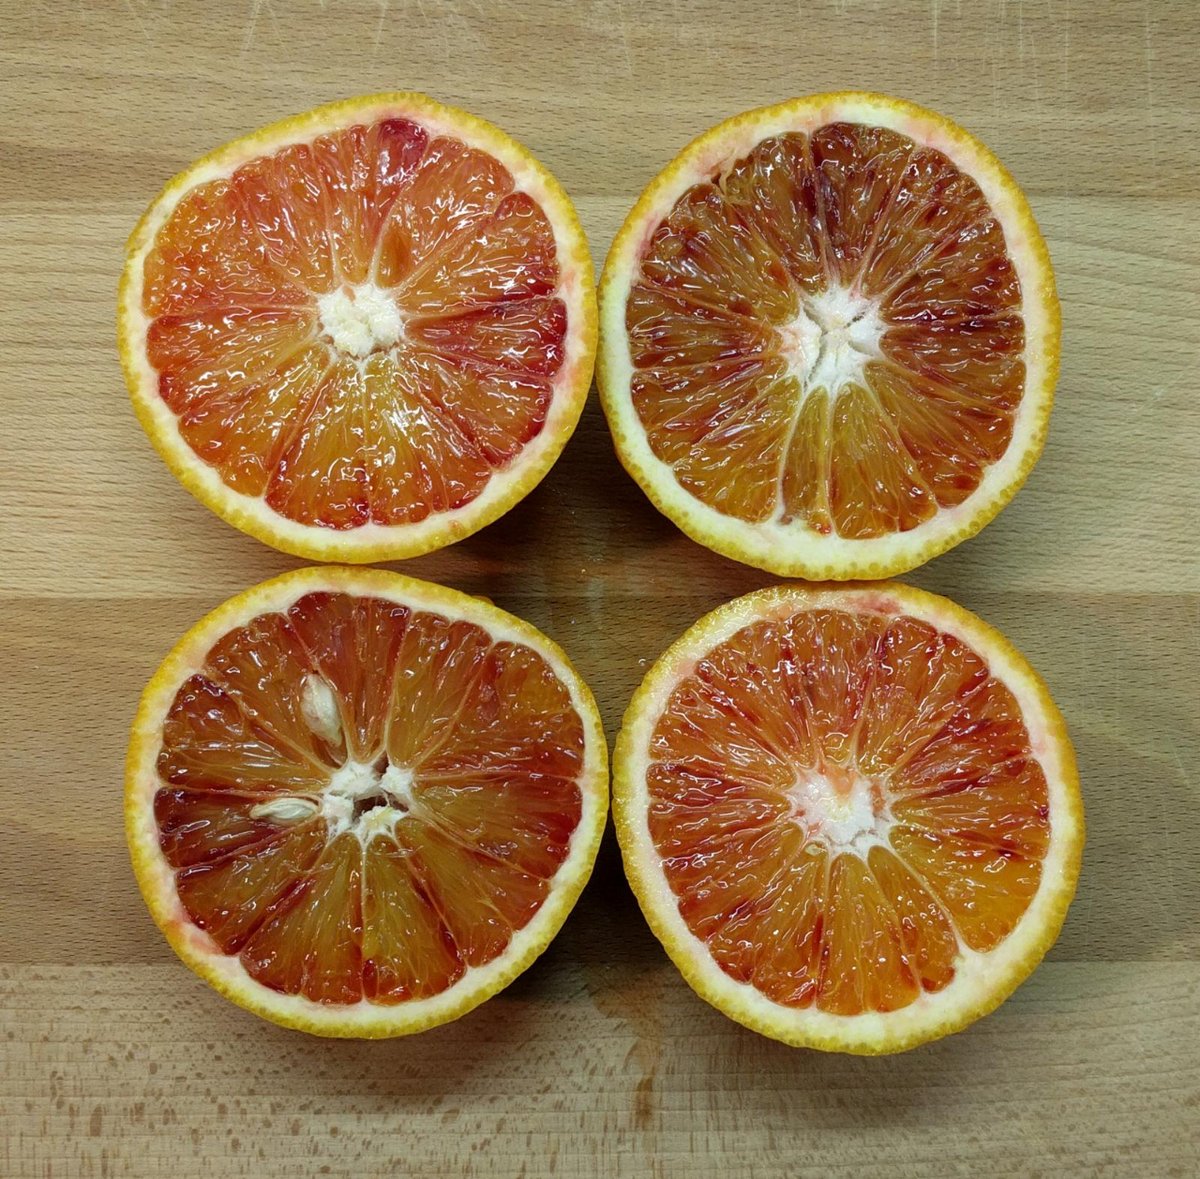 Blood orange is still on the menu - a really delicious taste of spring that will awaken your palate!